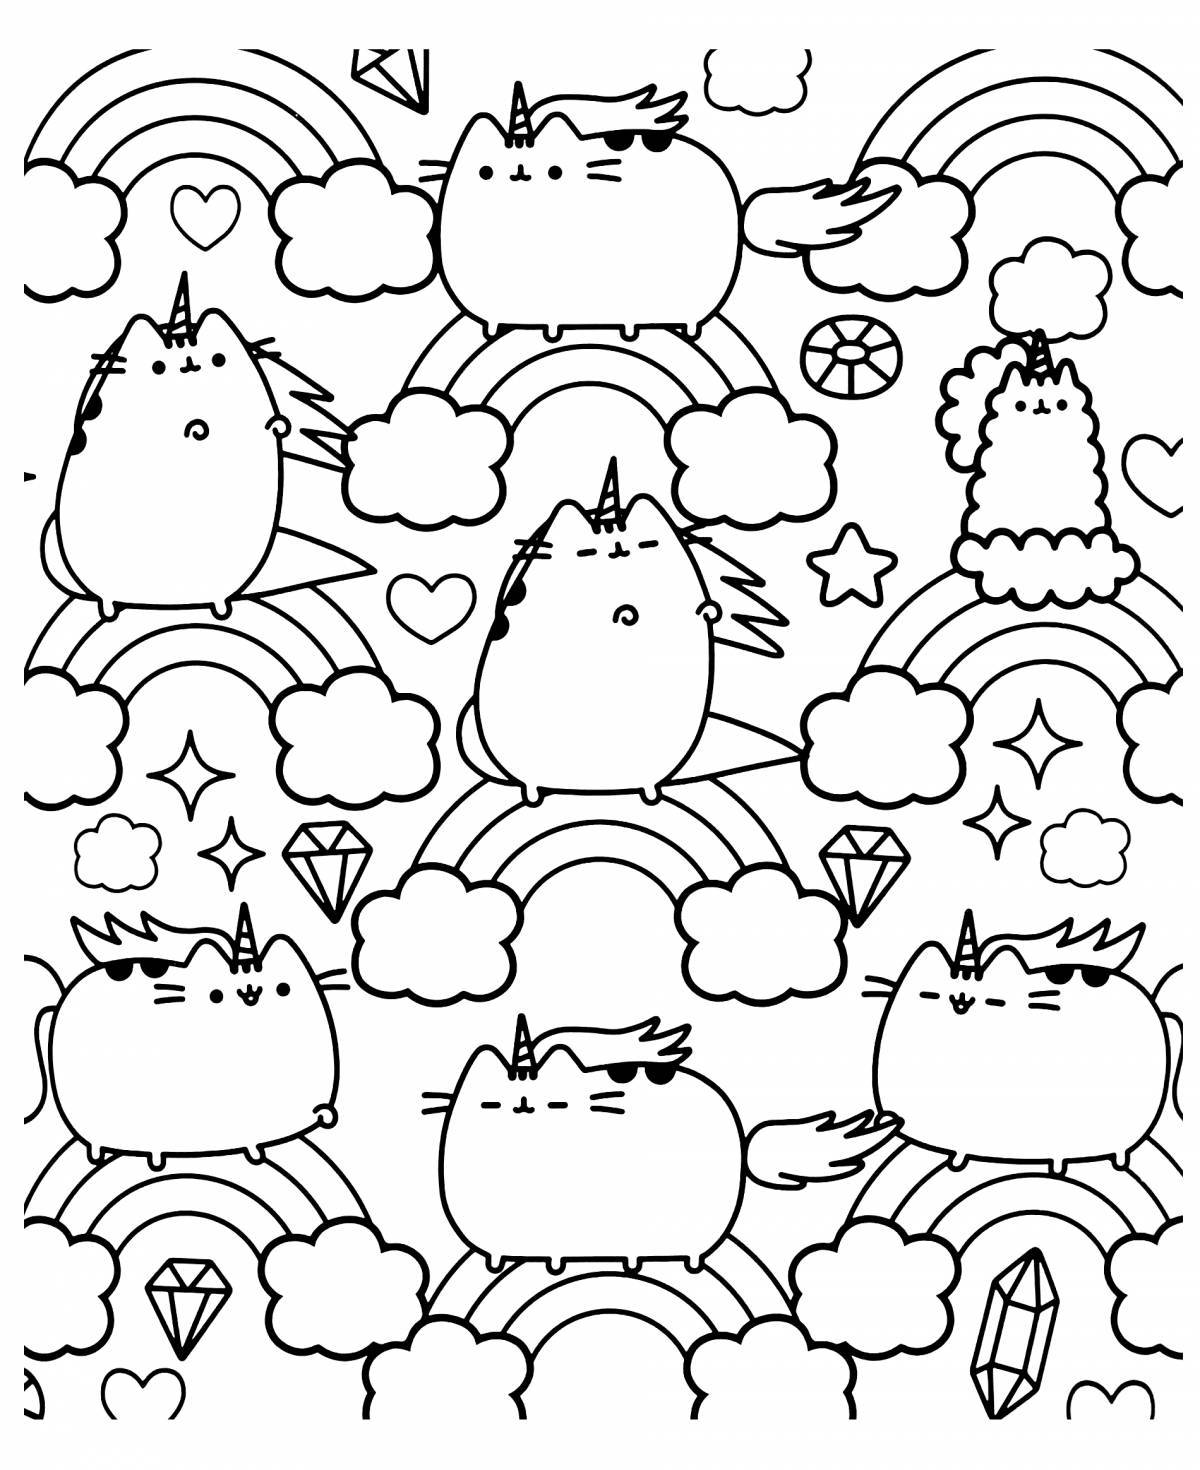 Coloring page bright cat pusheen